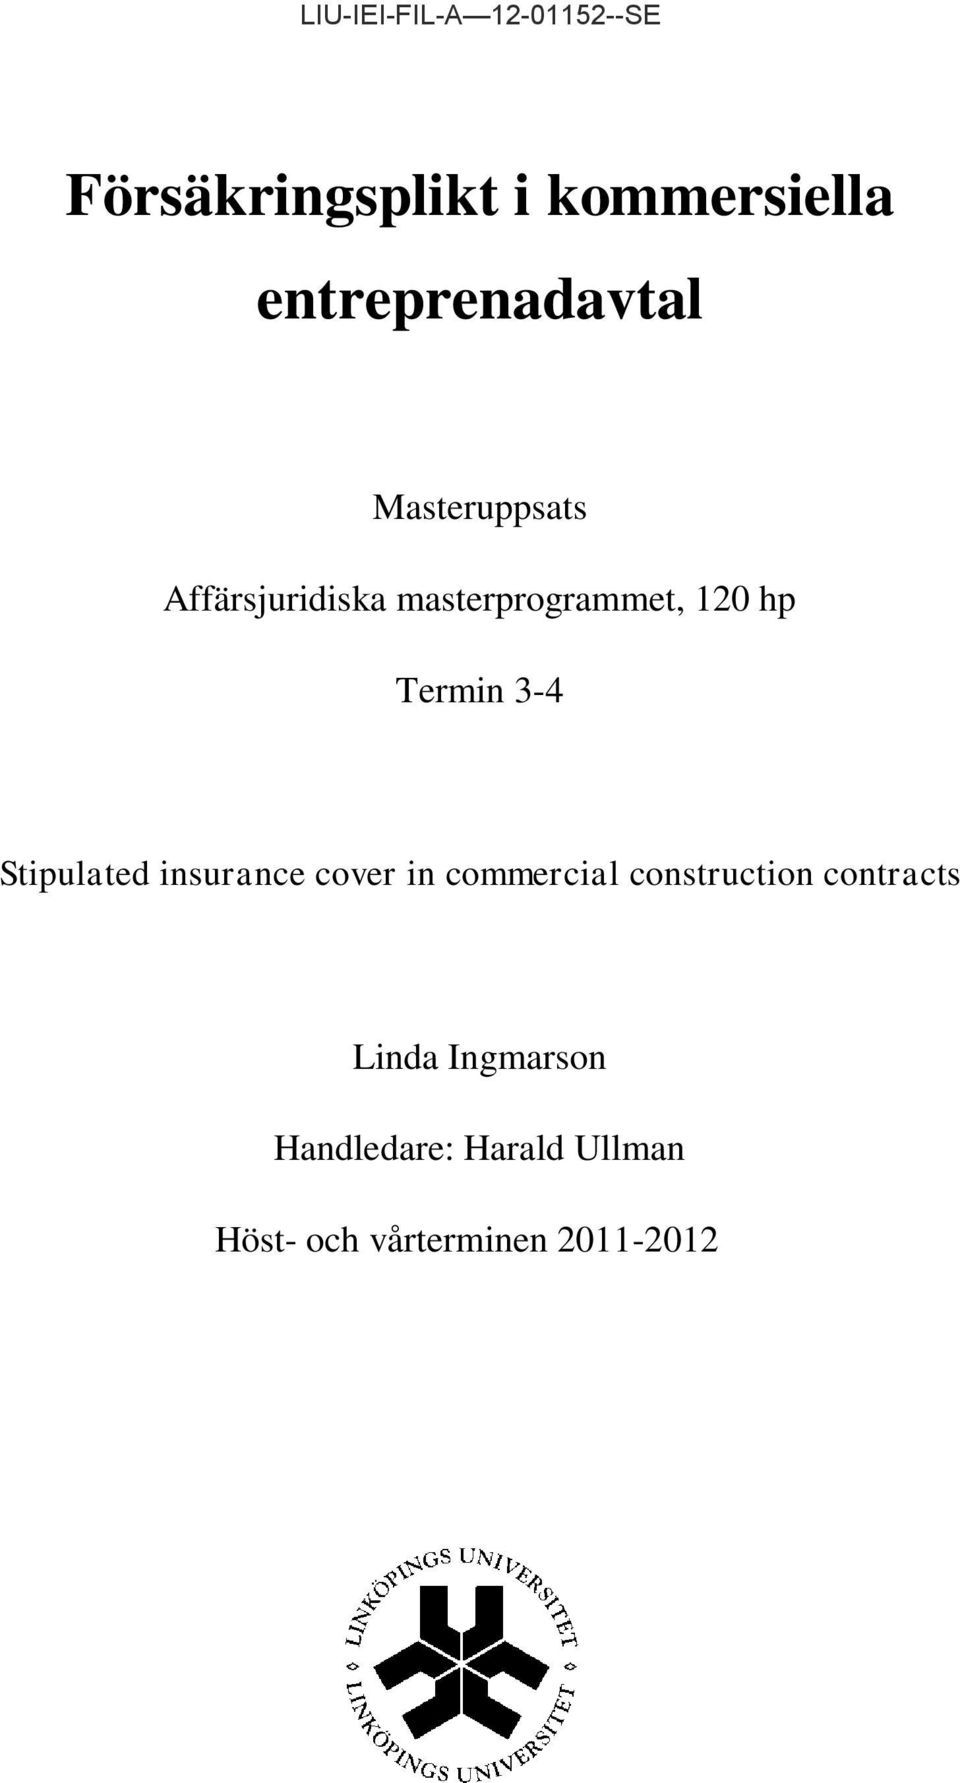 hp Termin 3-4 Stipulated insurance cover in commercial construction